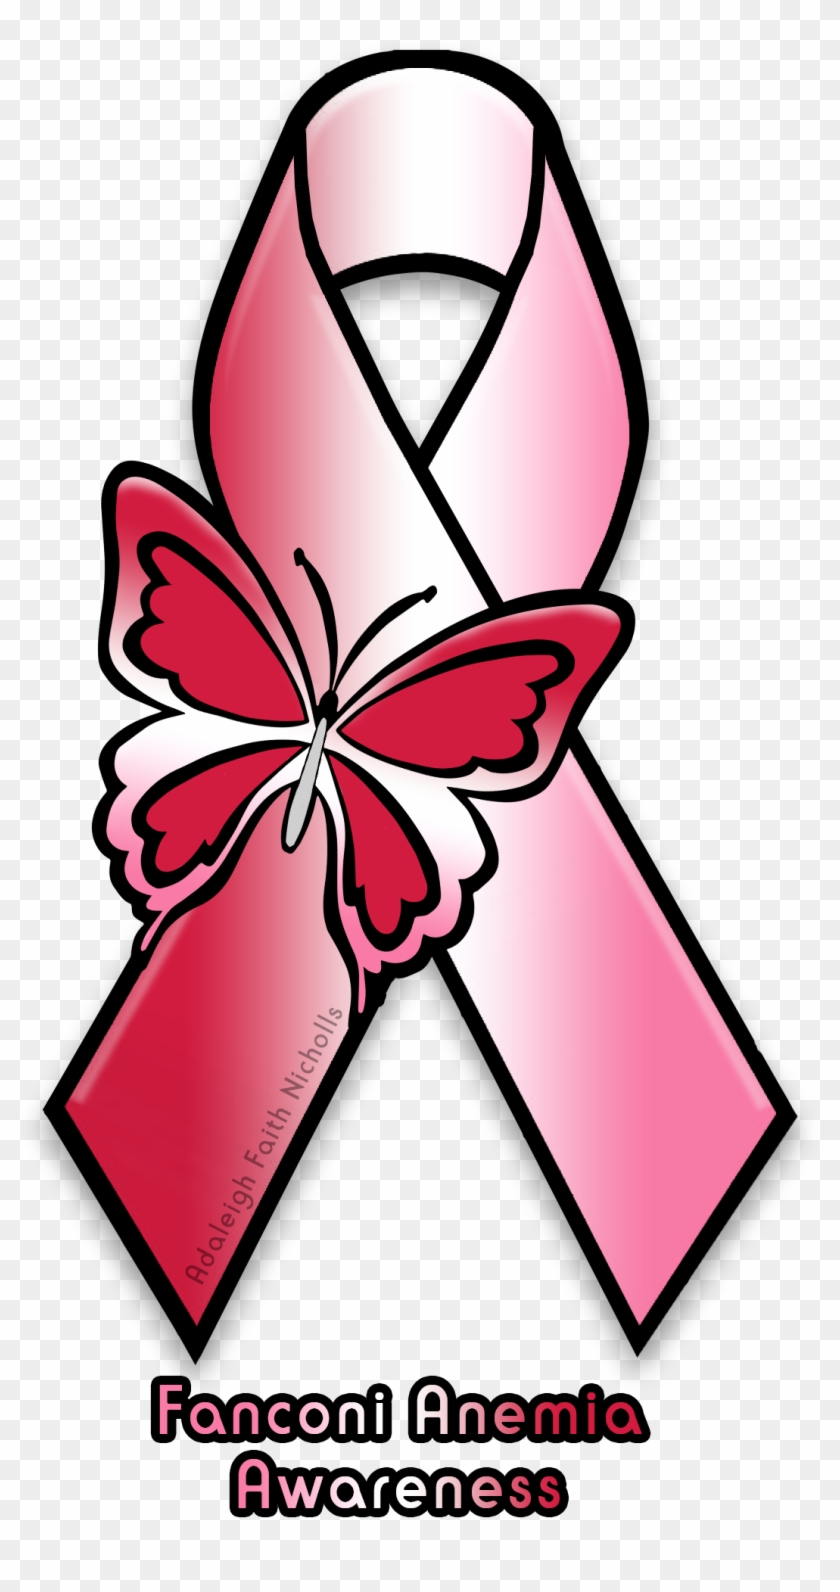 Fanconi Anemia Awareness Ribbon By Adaleighfaith Fanconi - Mental Health Green Ribbon Png #187462